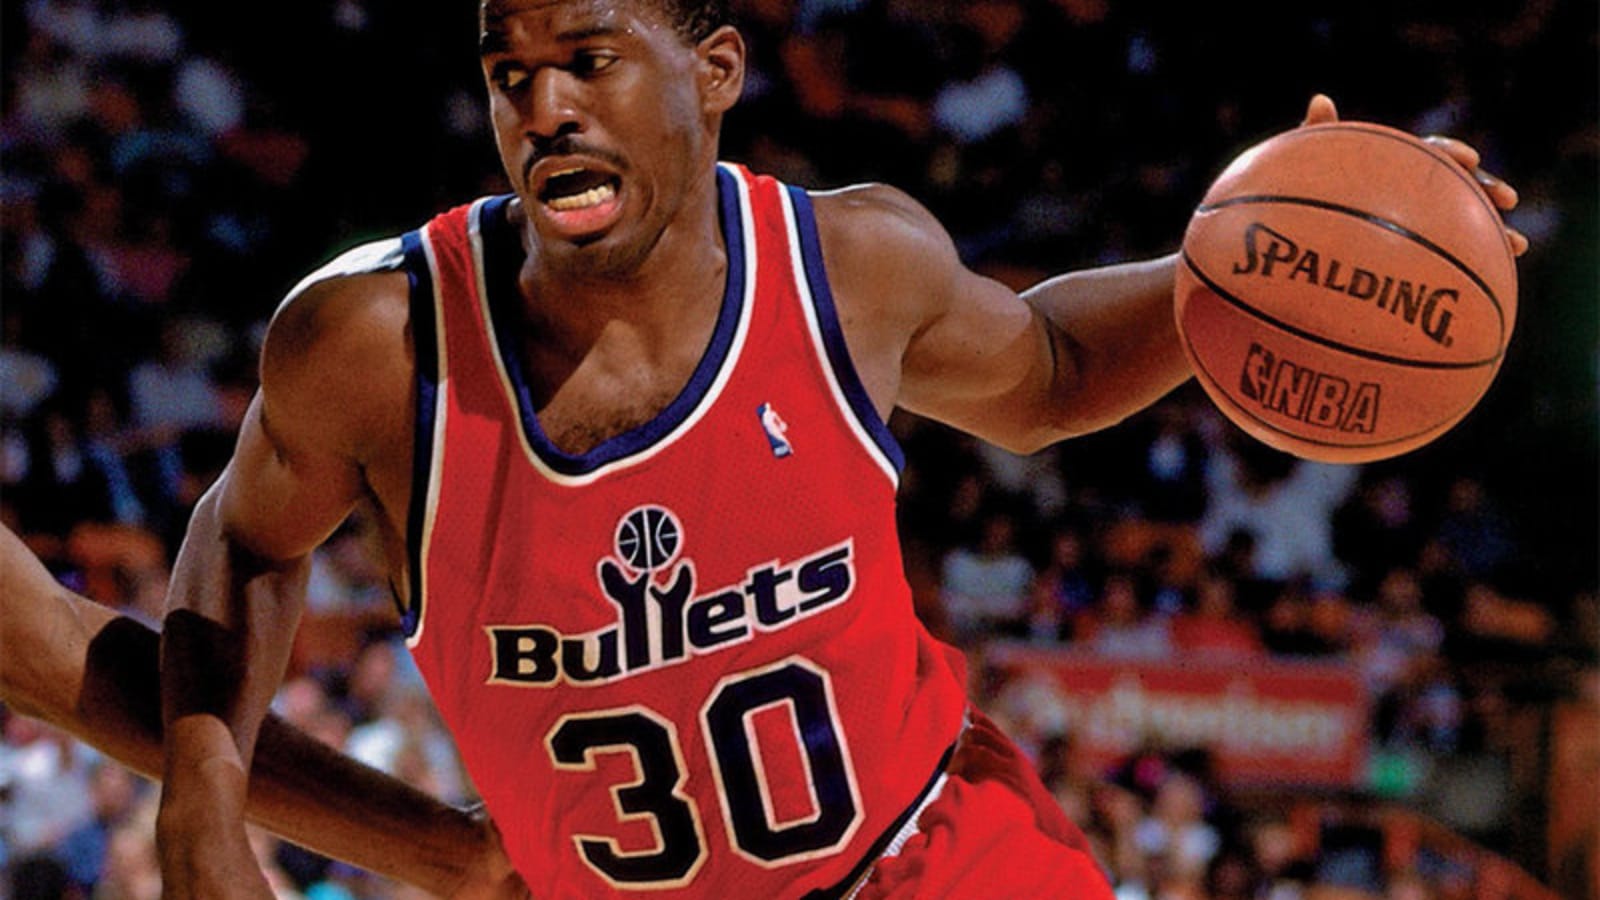 Should the Wizards Go Back to Being the Bullets?